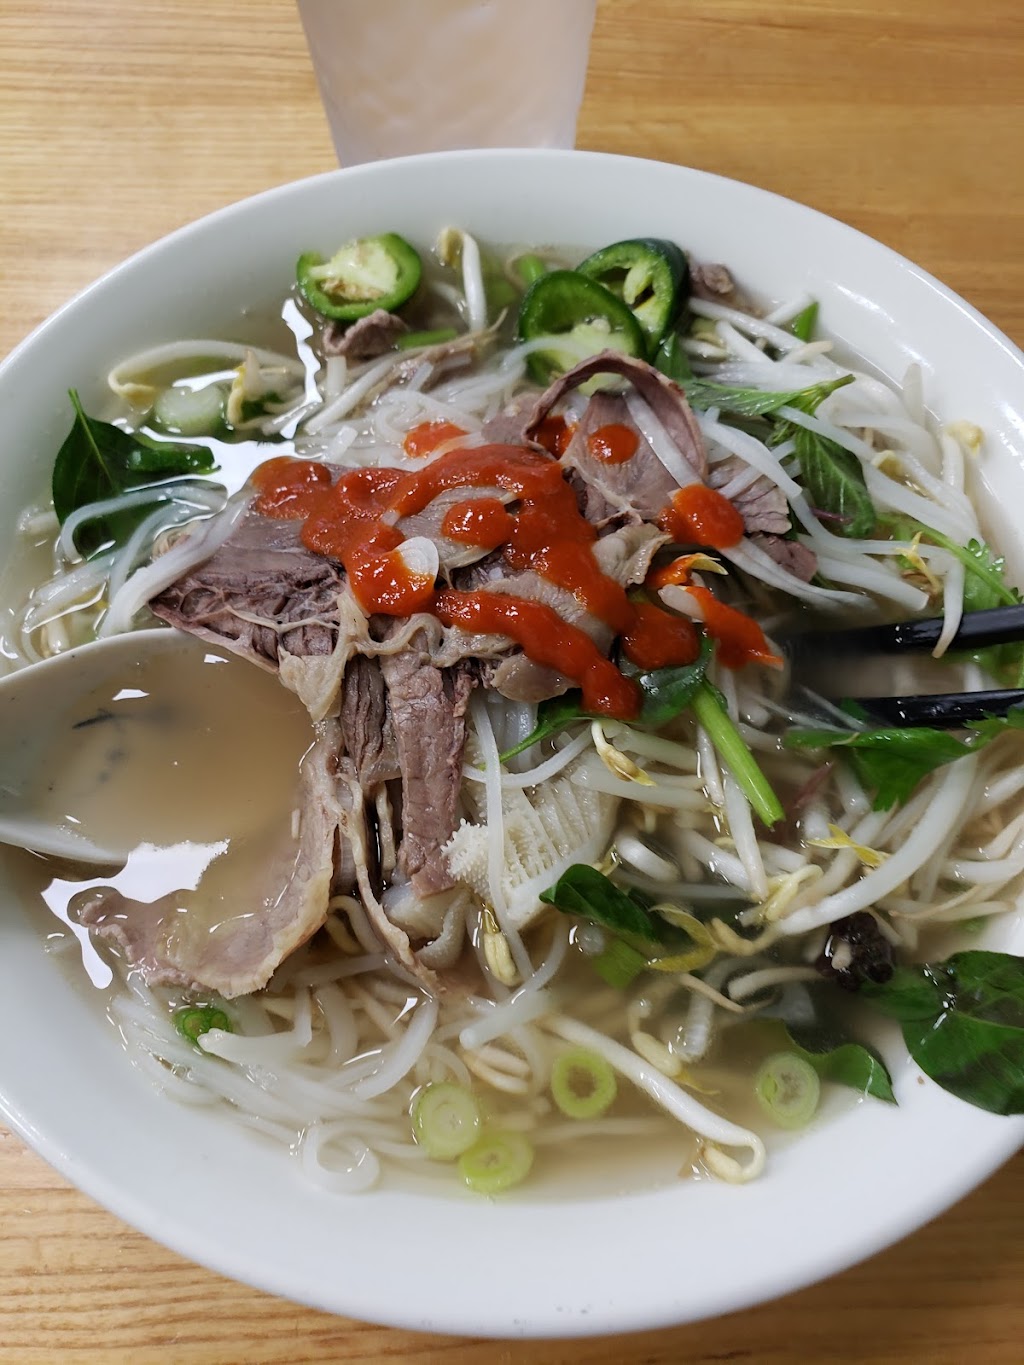 Pho Now | 210 Cypresswood Dr, Spring, TX 77388, USA | Phone: (281) 968-2222